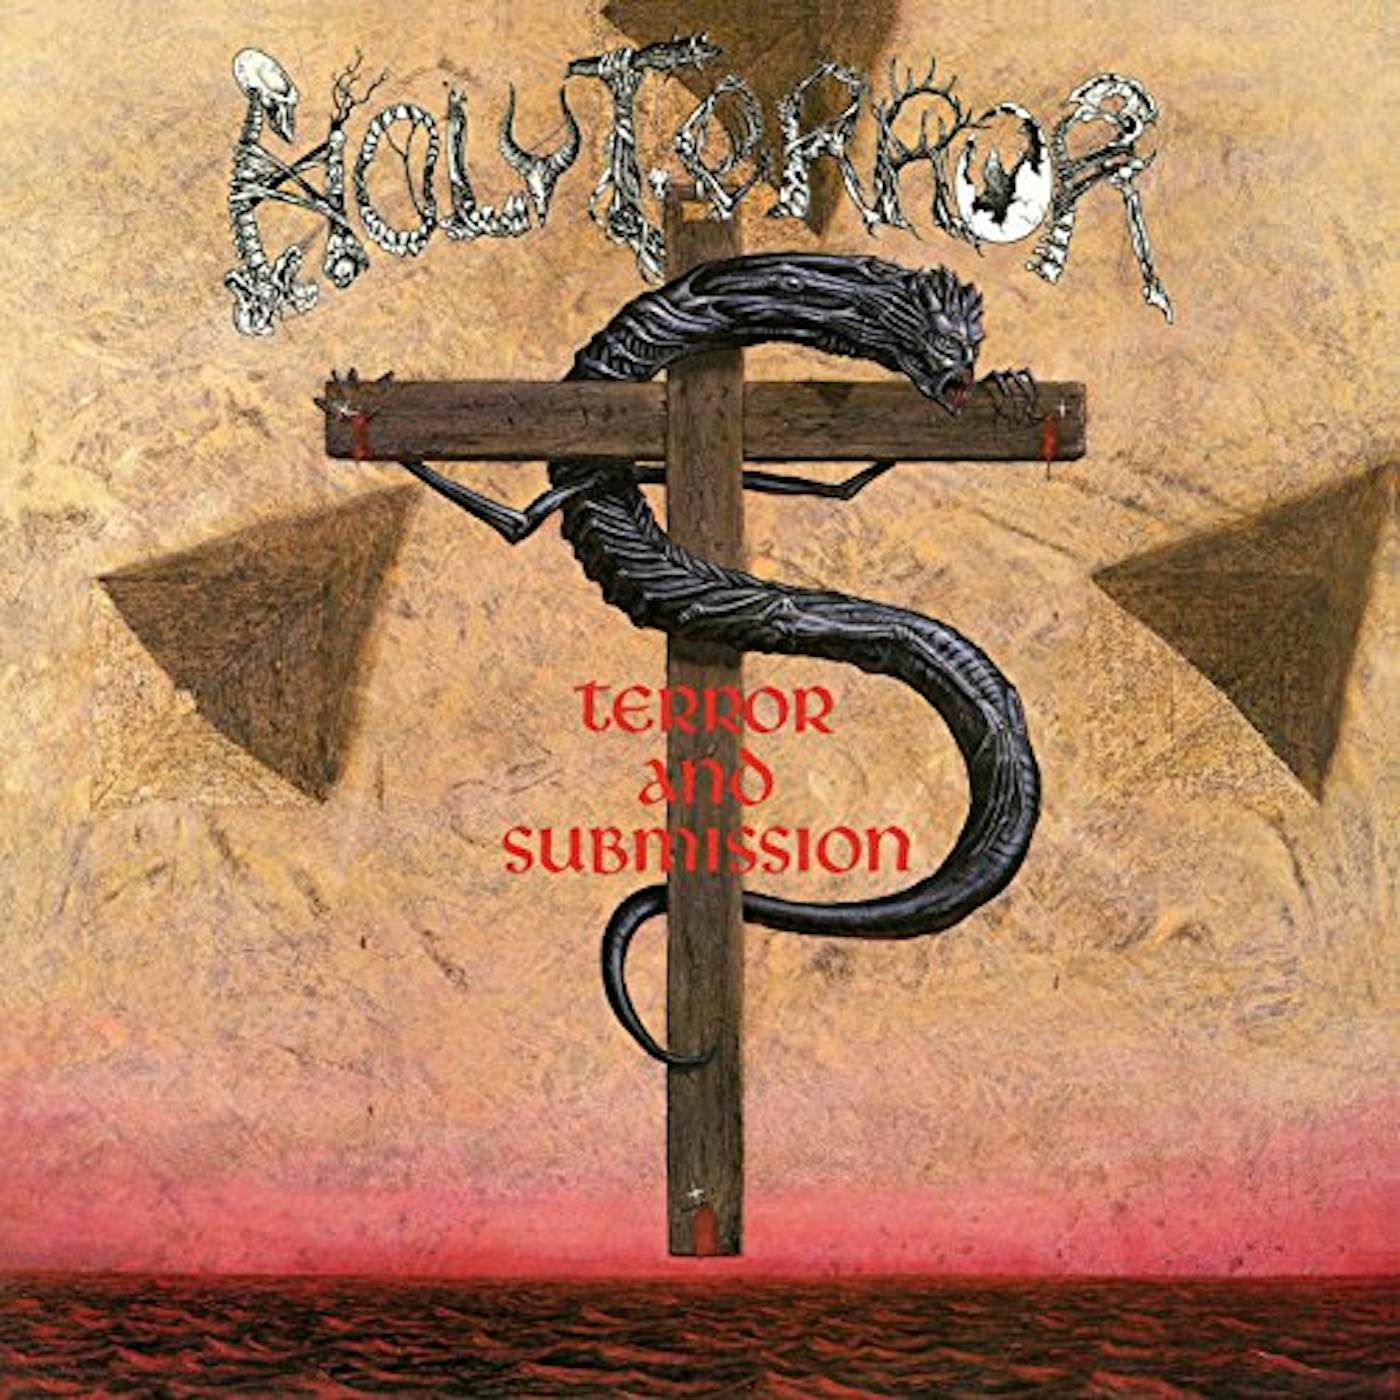 Holy Terror Terror And Submission Vinyl Record